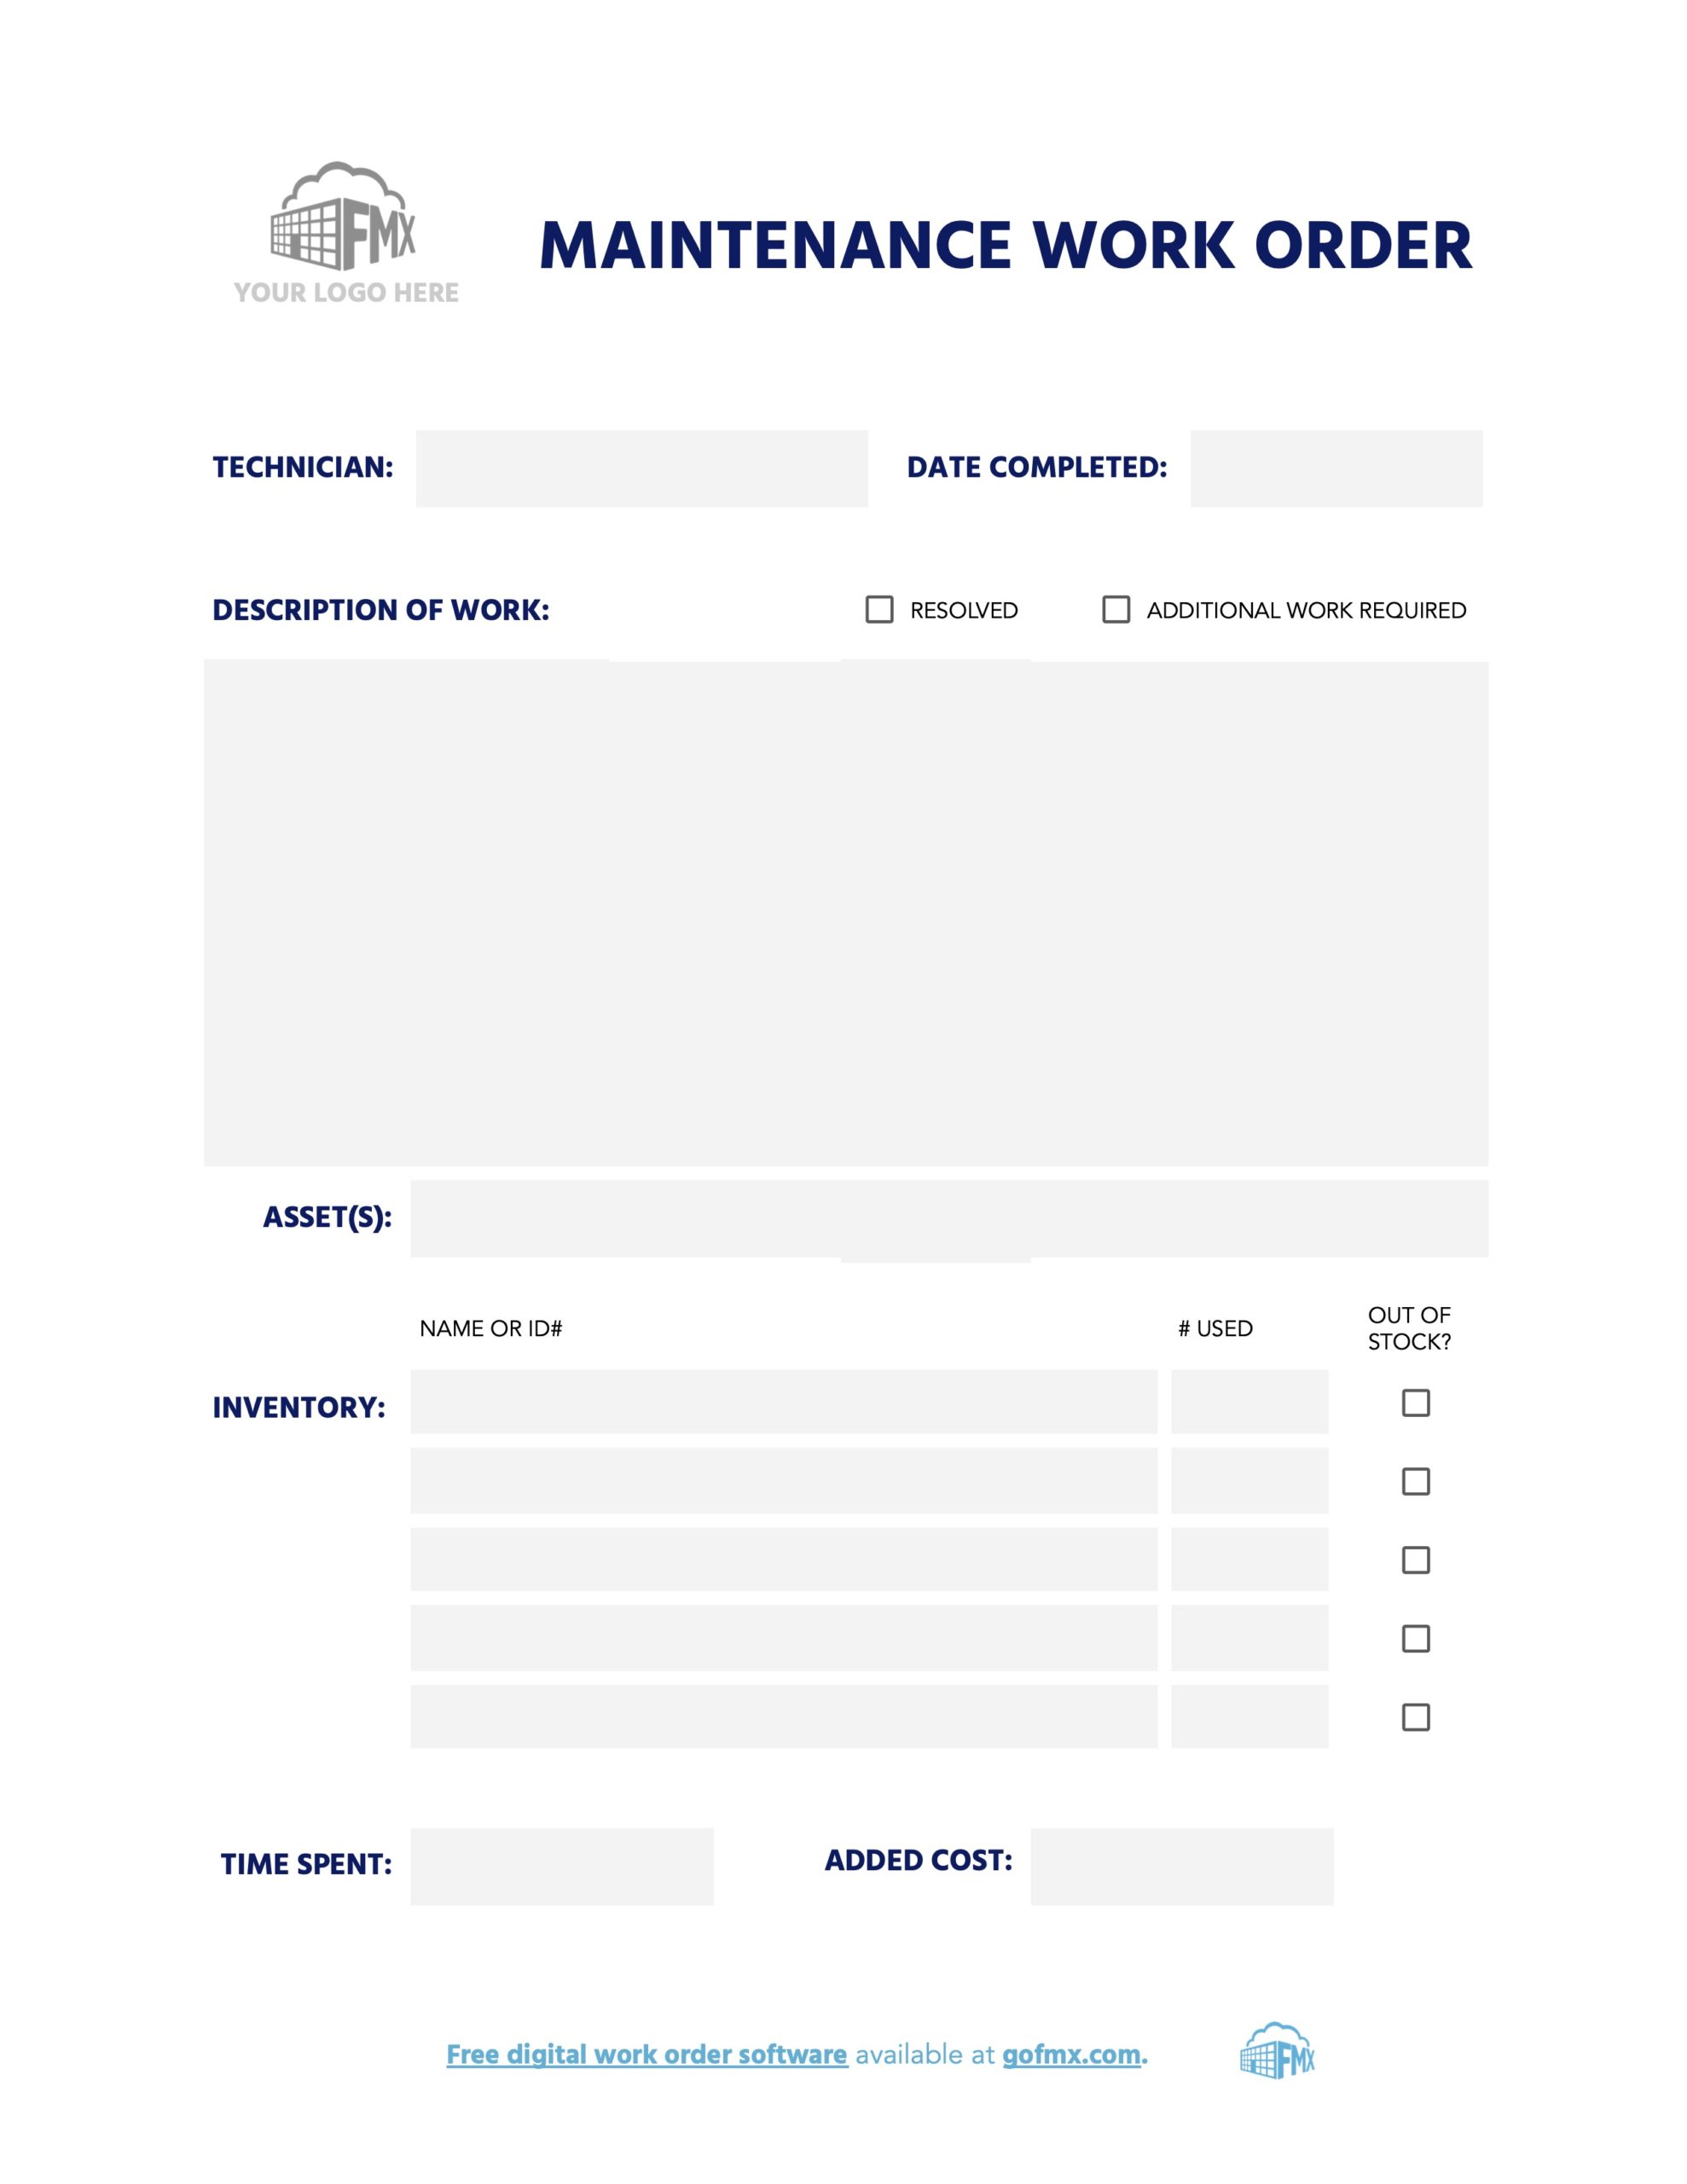 Maintenance Work Order Form Free Downloadable Template FMX